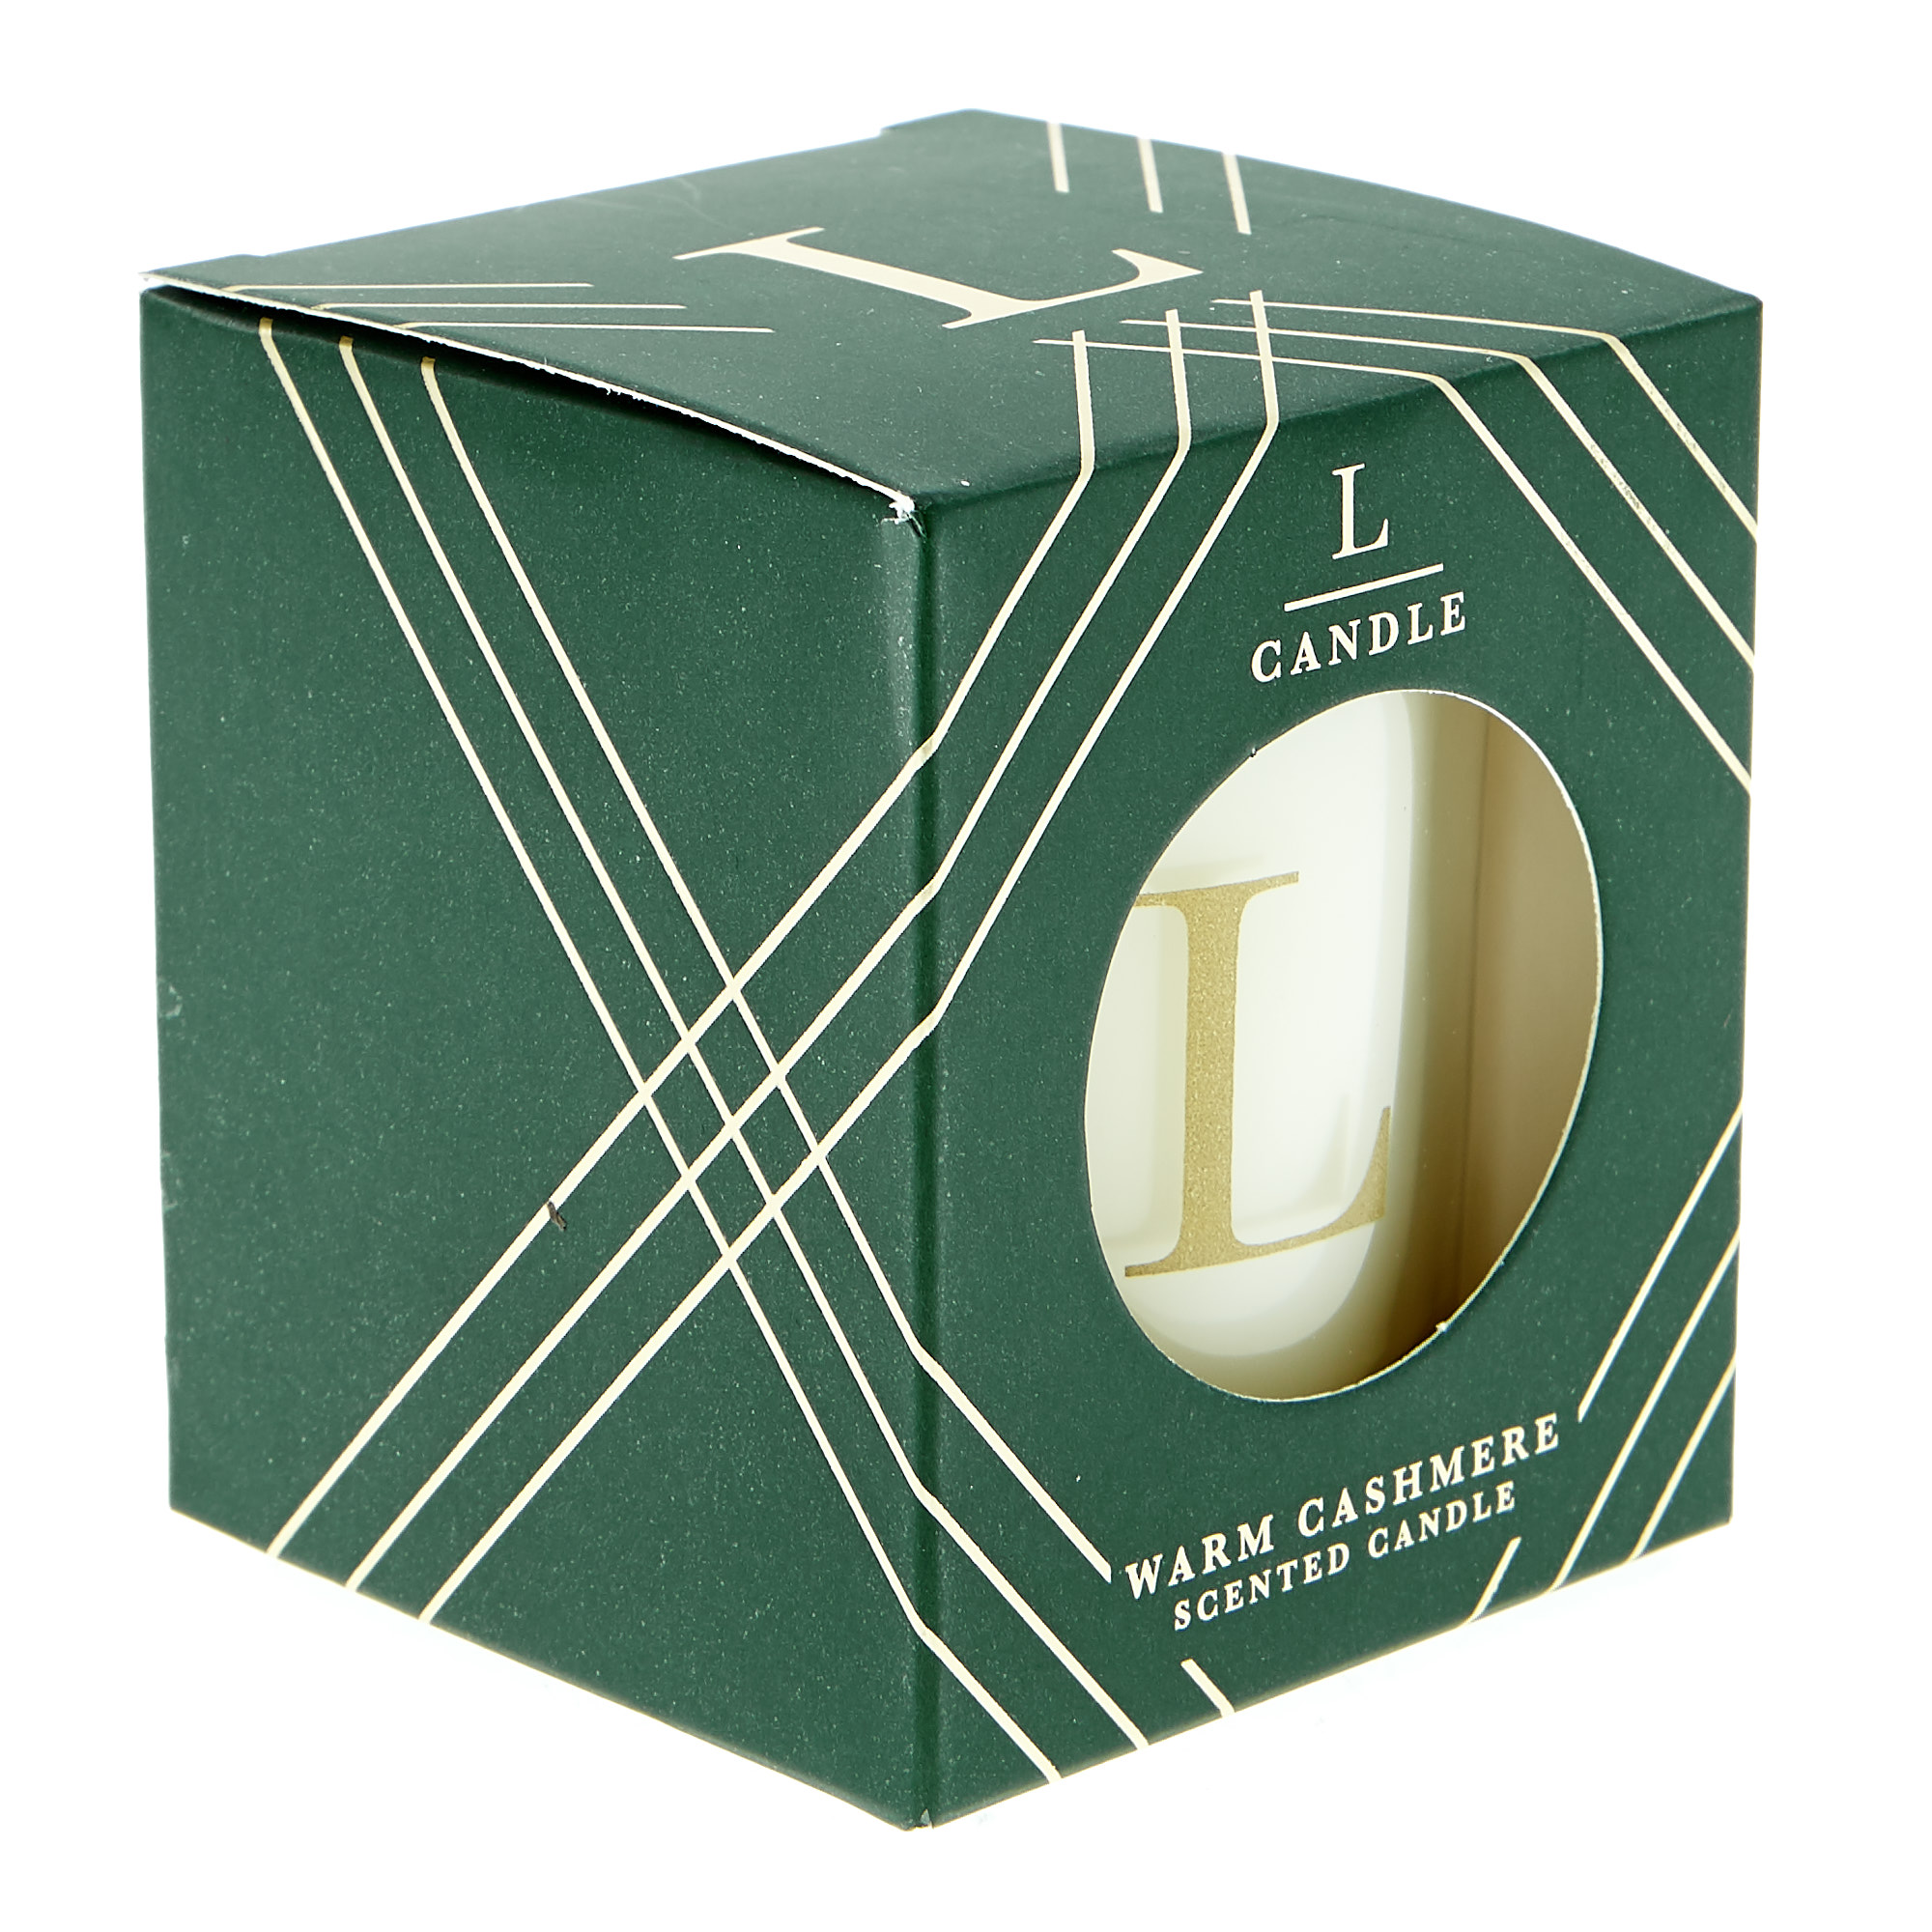 Letter L Warm Cashmere Scented Candle